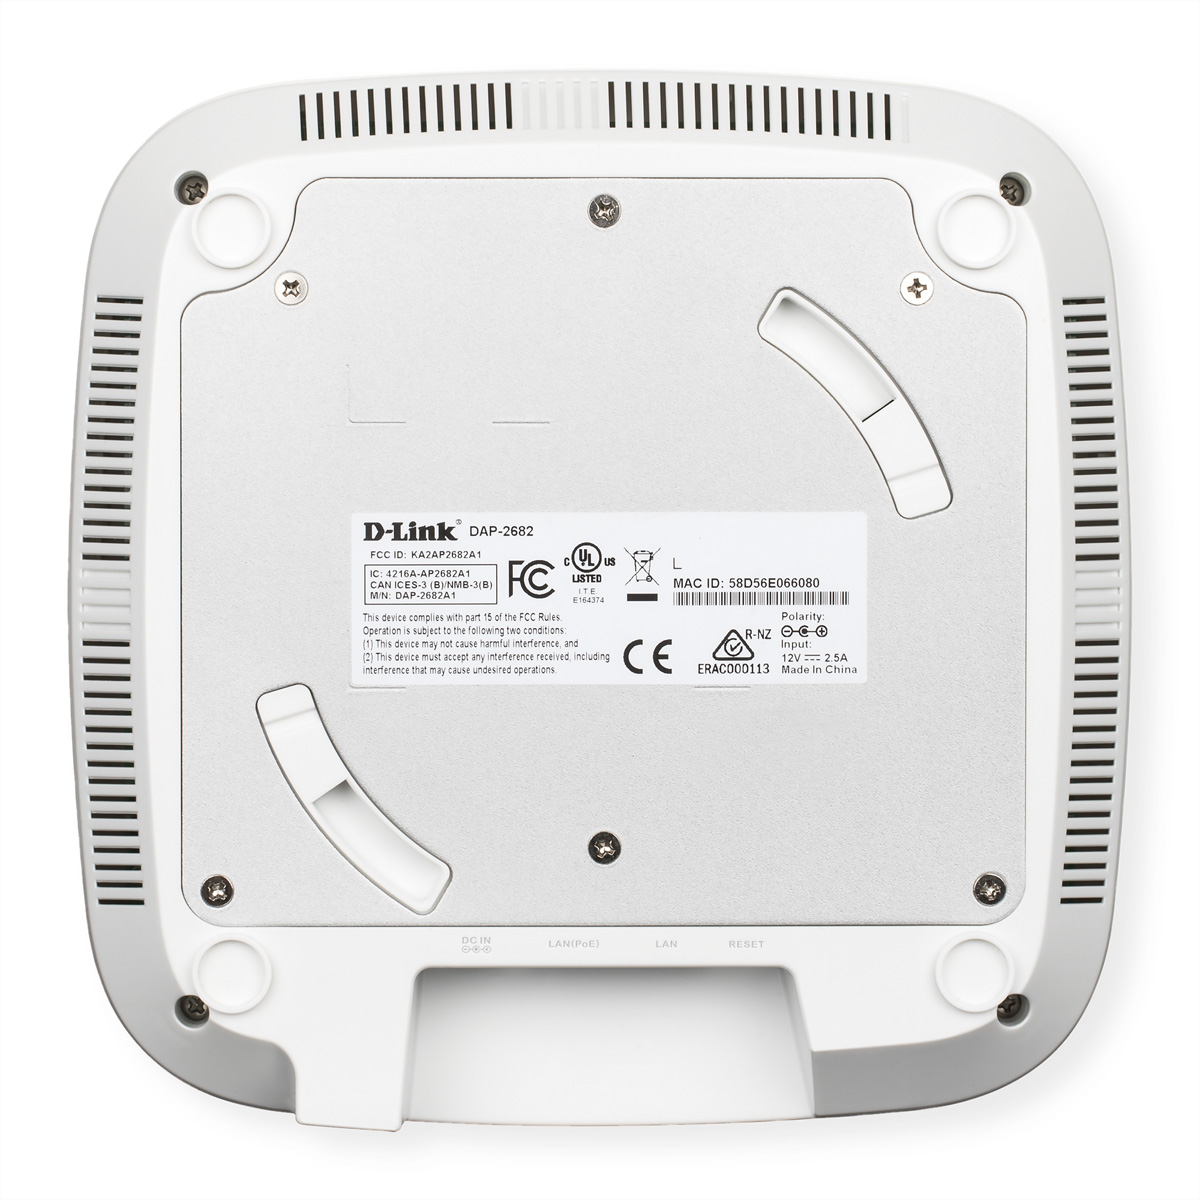 Wave Points PoE Dual-Band Wireless DAP-2682 D-LINK Access Point AC2300 Gbit/s Access 2 2,3